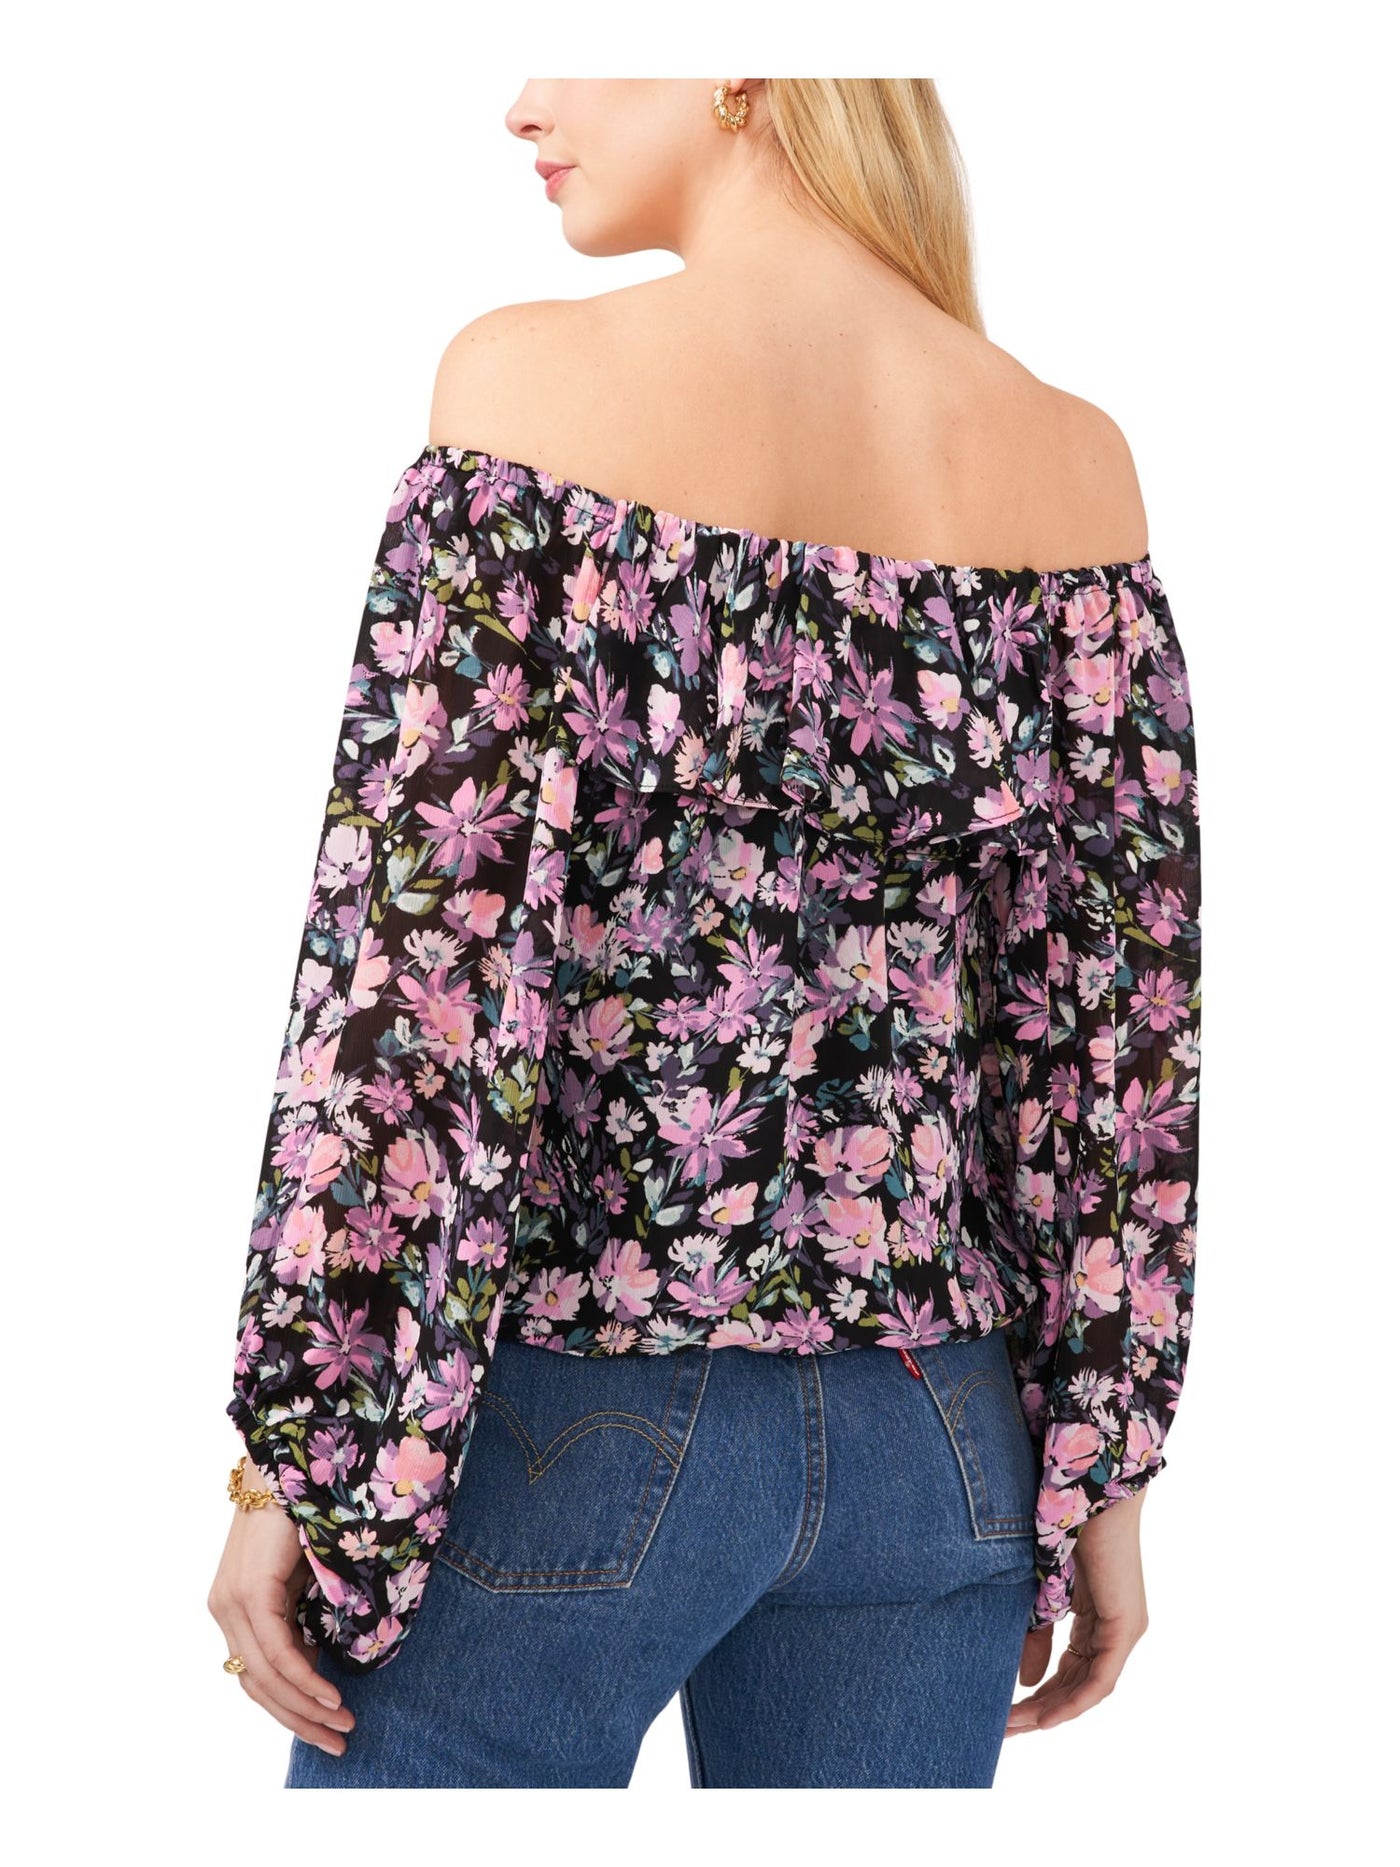 VINCE CAMUTO Womens Black Ruffled Pleated Elastic Trim Lined Floral Long Sleeve Off Shoulder Top XS